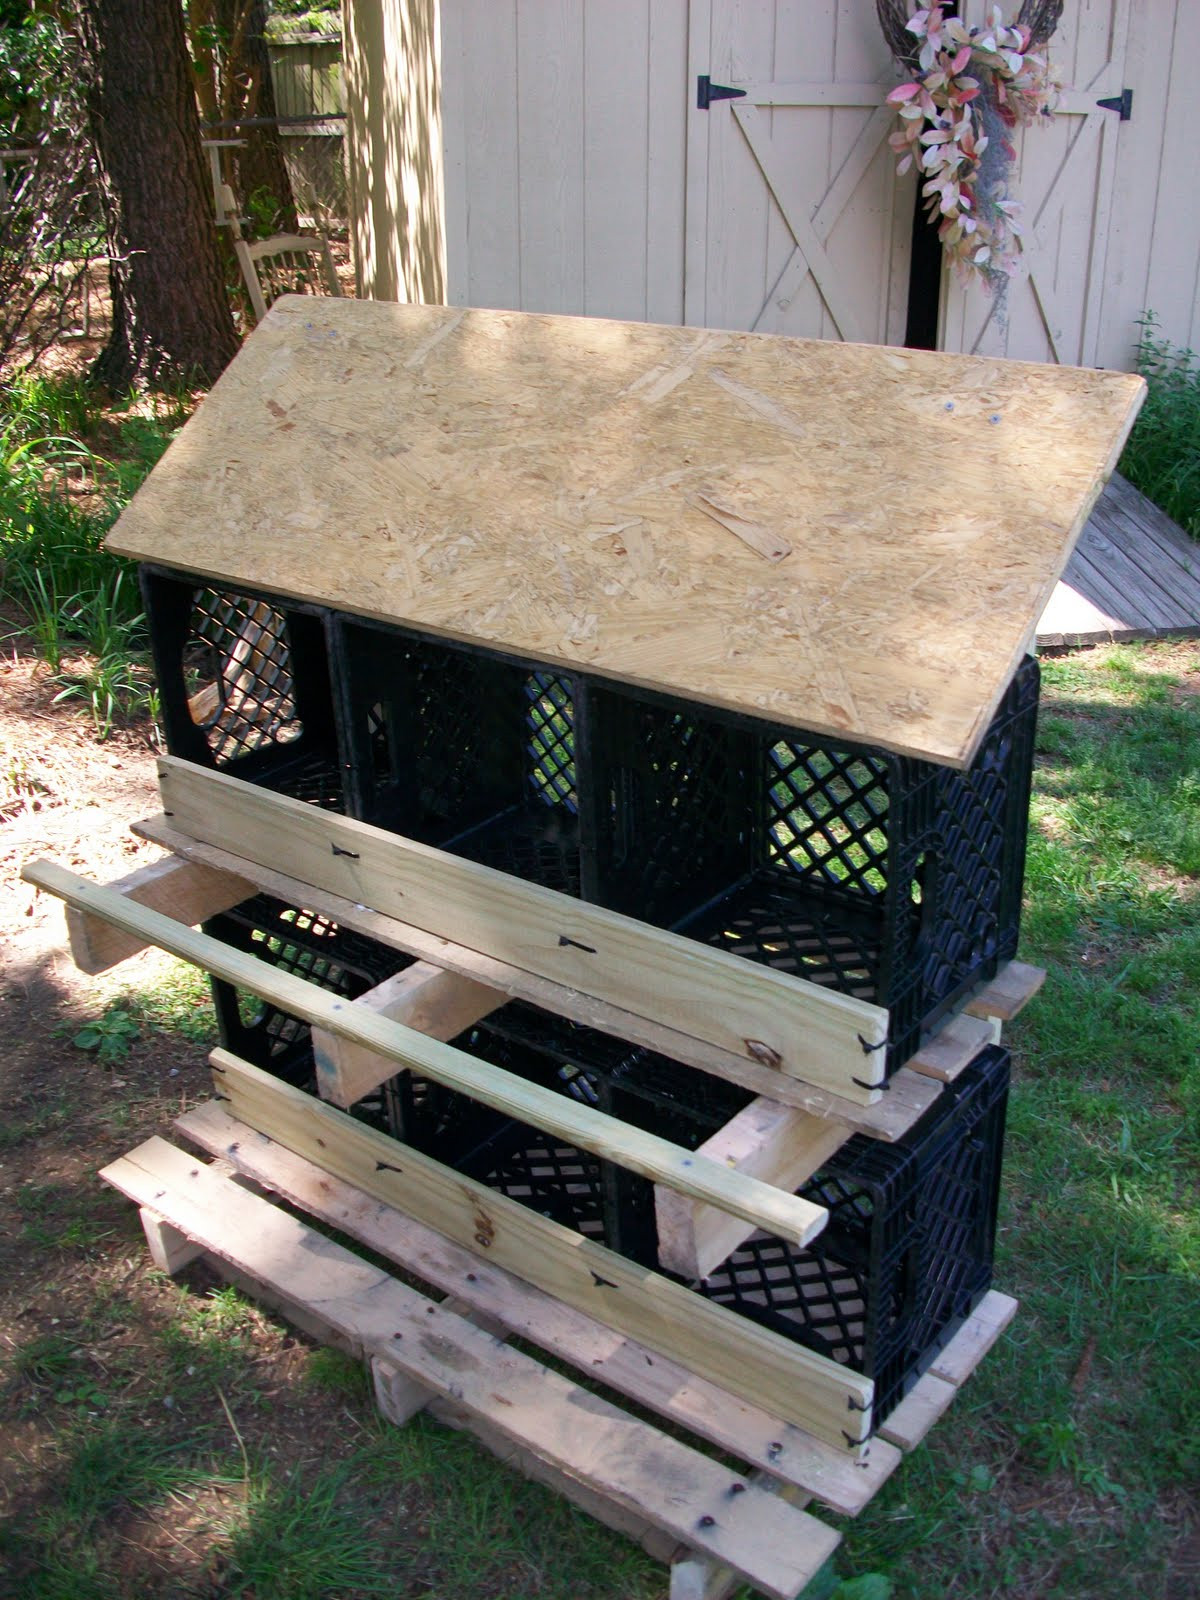 DIY Nesting Boxes For Chickens
 20 Easy & Cheap DIY Chicken Nesting Boxes